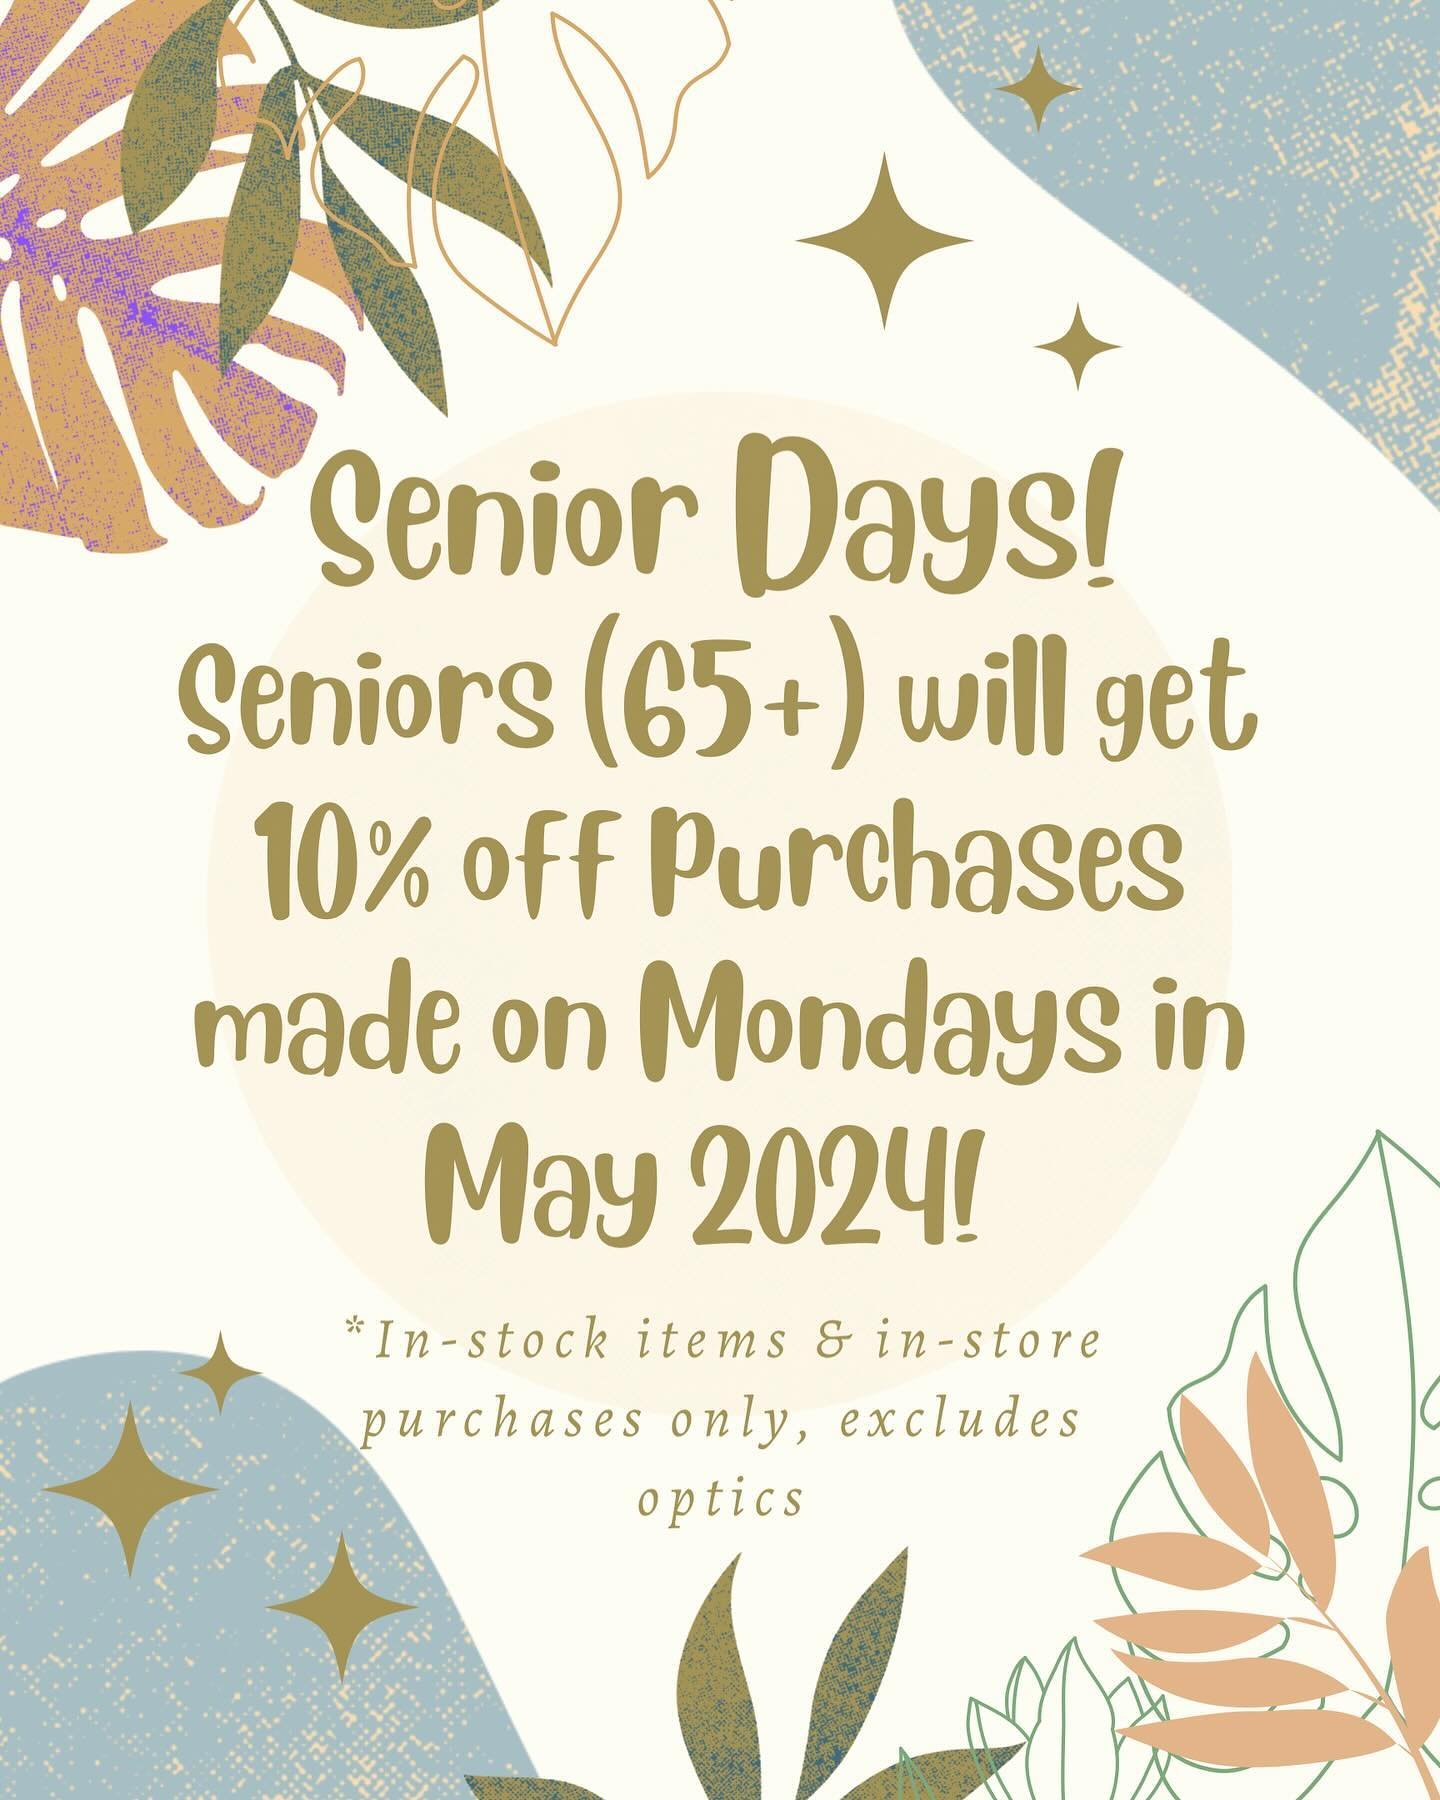 It&rsquo;s senior Monday! Come see us today! We&rsquo;re open until 5pm! 

#seniorday #seniordiscount #wildbirdandgarden #shopsmall #localbusiness #familyownedbusiness #wilmingtonnc #supportsmallbusiness #shoplocalilm #smallbusiness